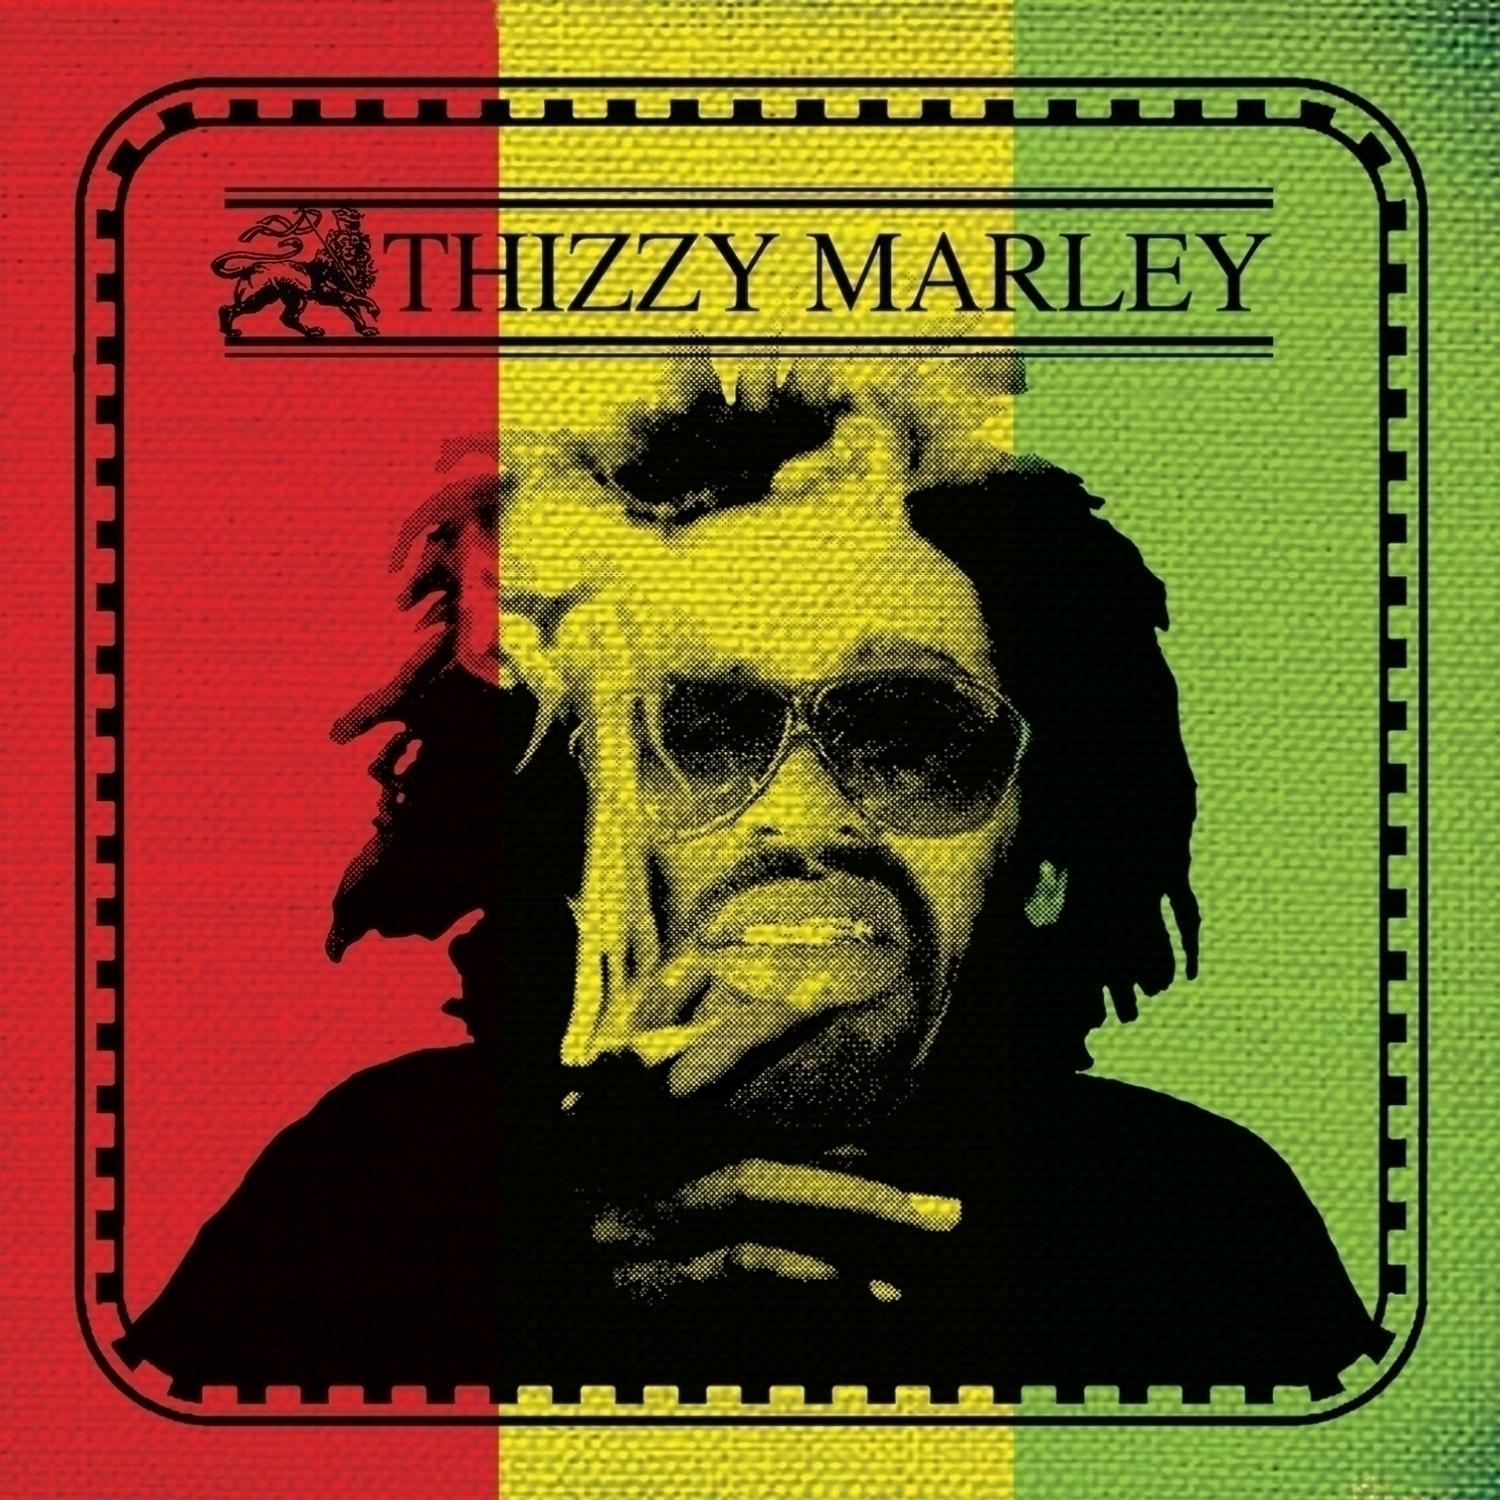 Thizzy Marley